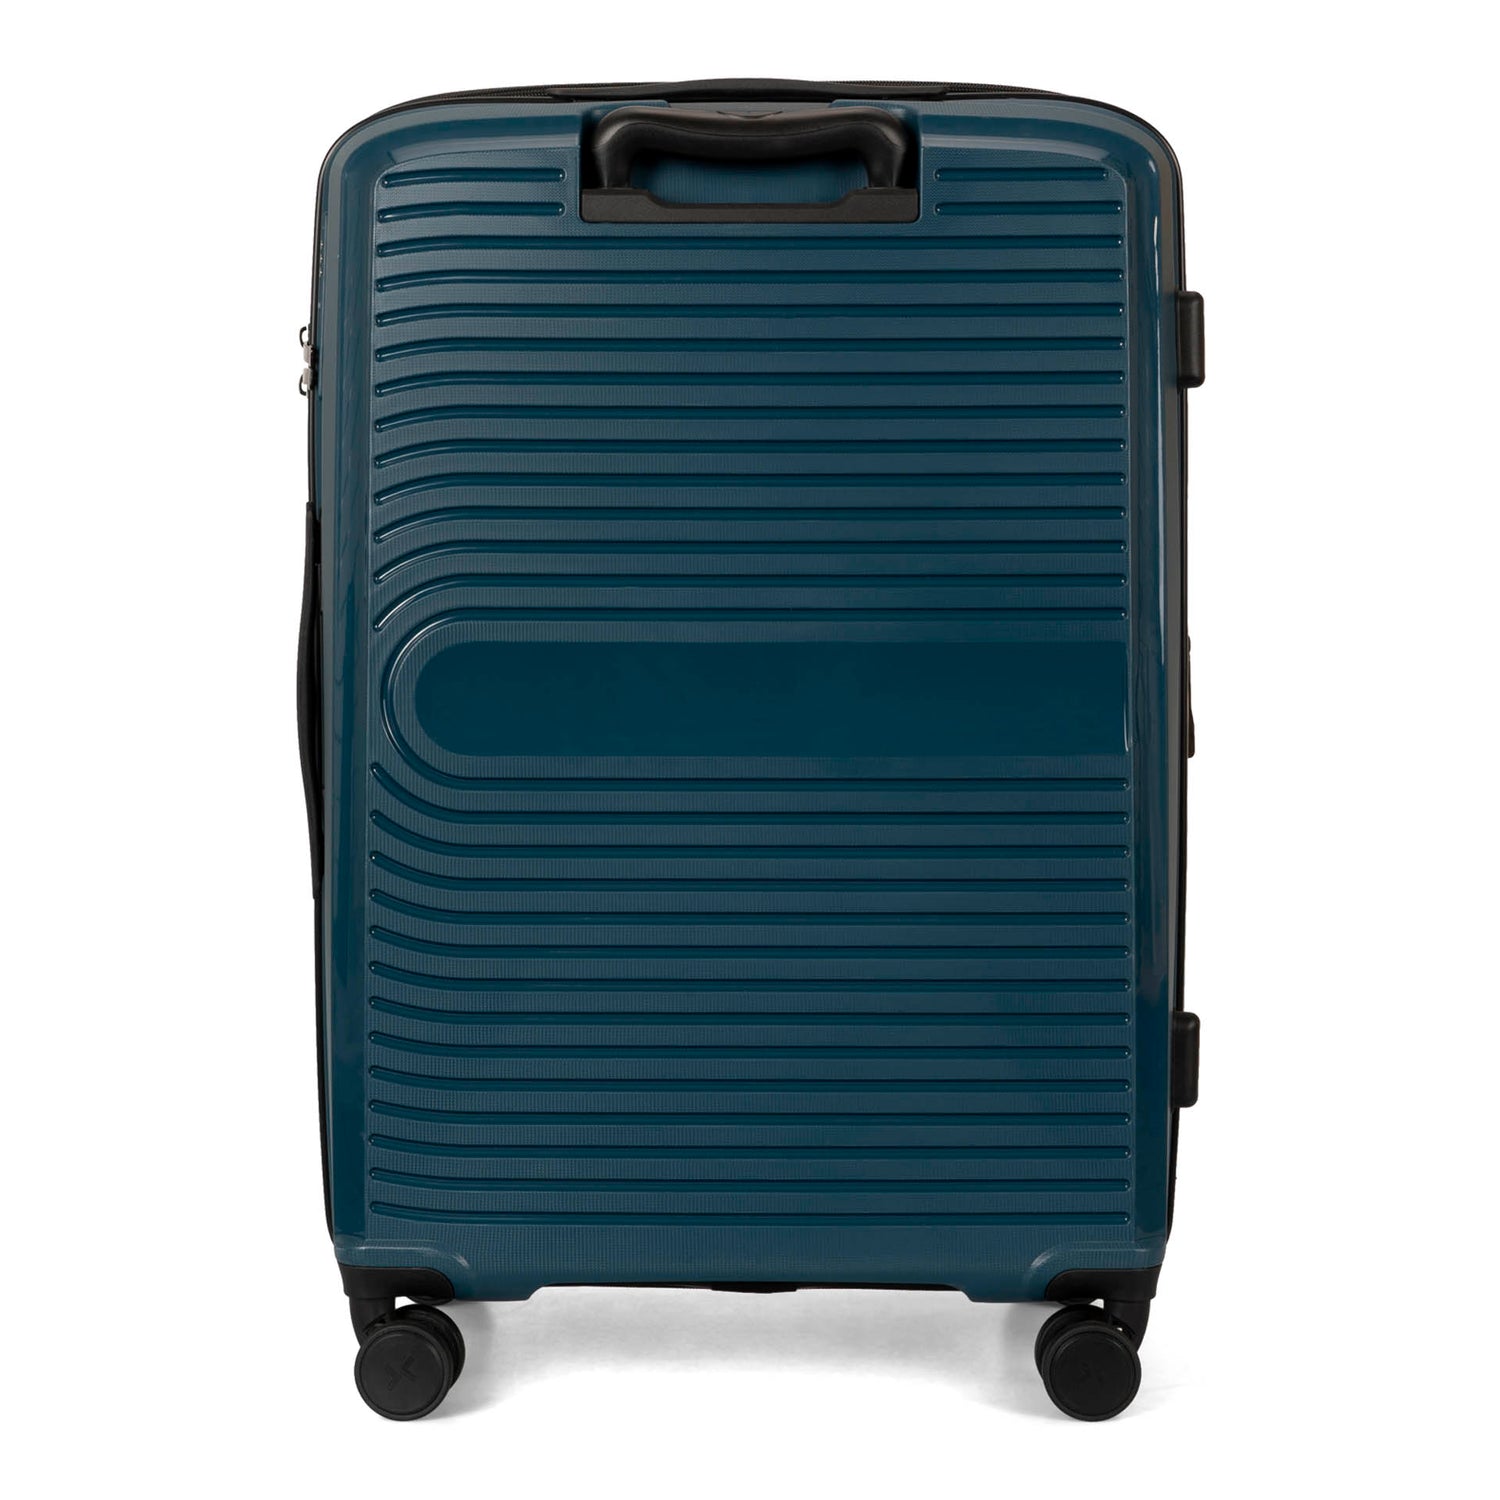 Back side of a navy luggage called Dynamo designed by Tracker showing its telescopic handle and lined-pattern shell.